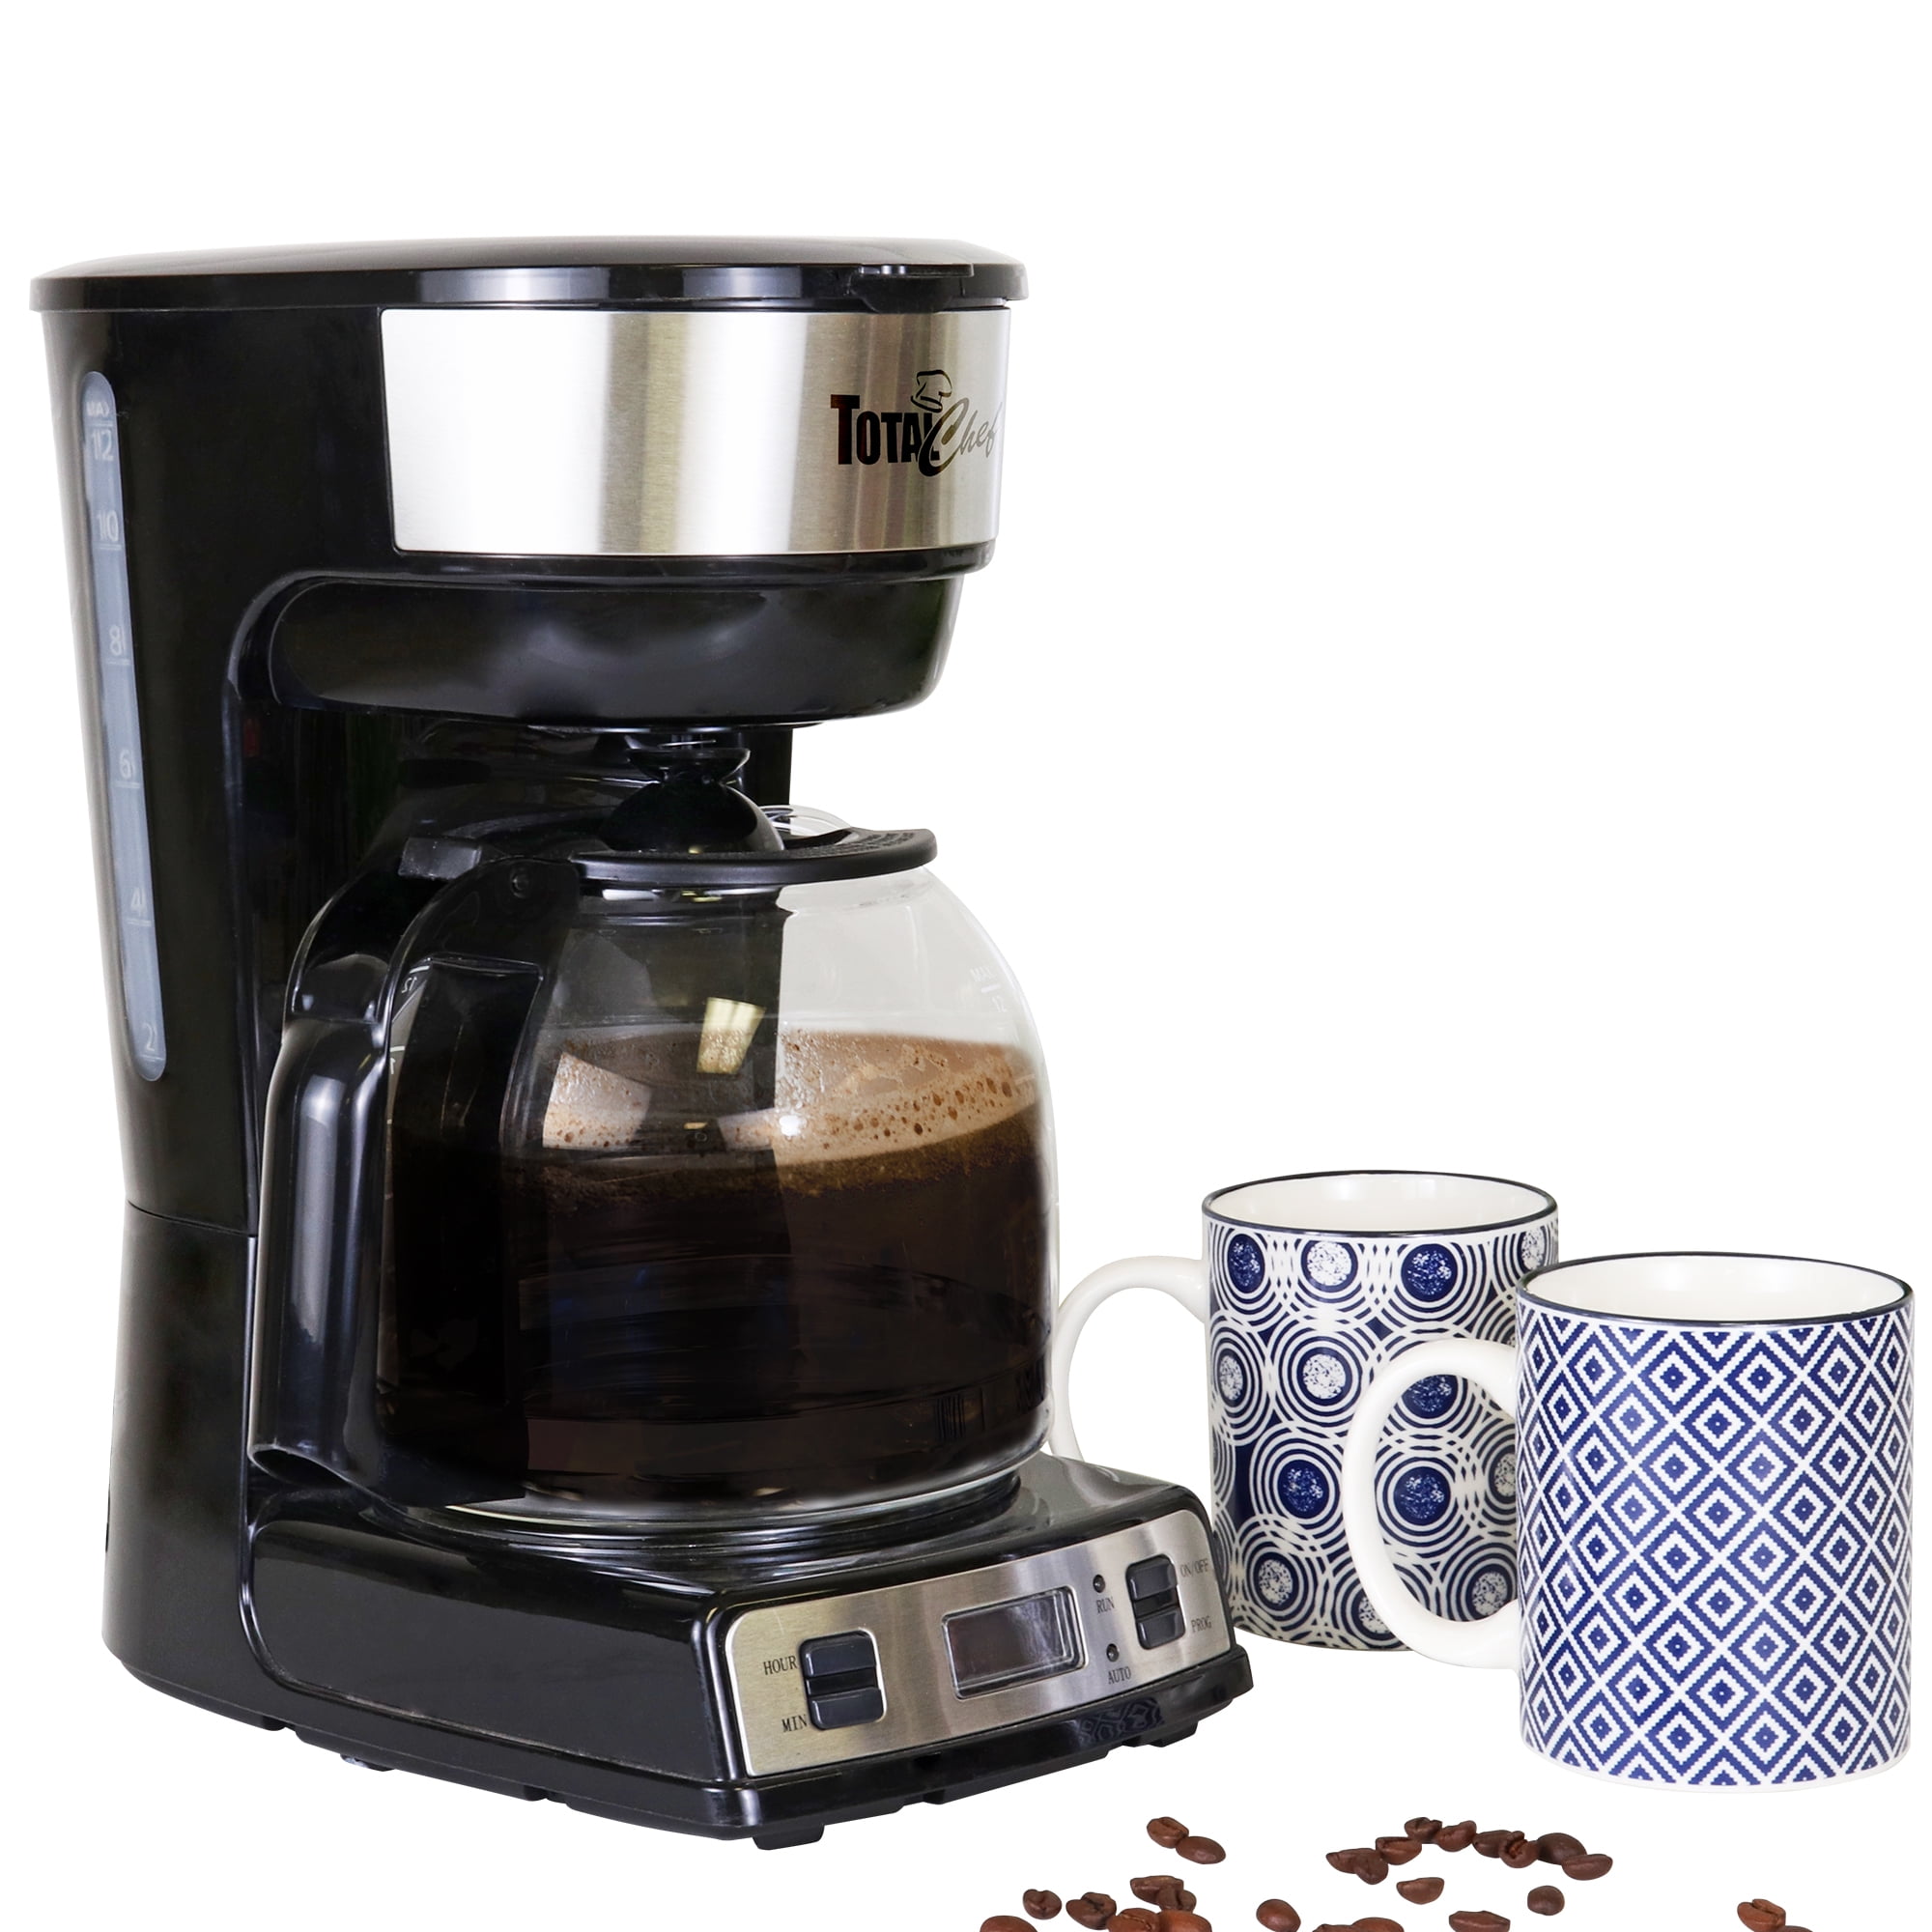 Total Chef 12 Cup Coffee Maker with Filter, Programmable Machine Black Walmart.com